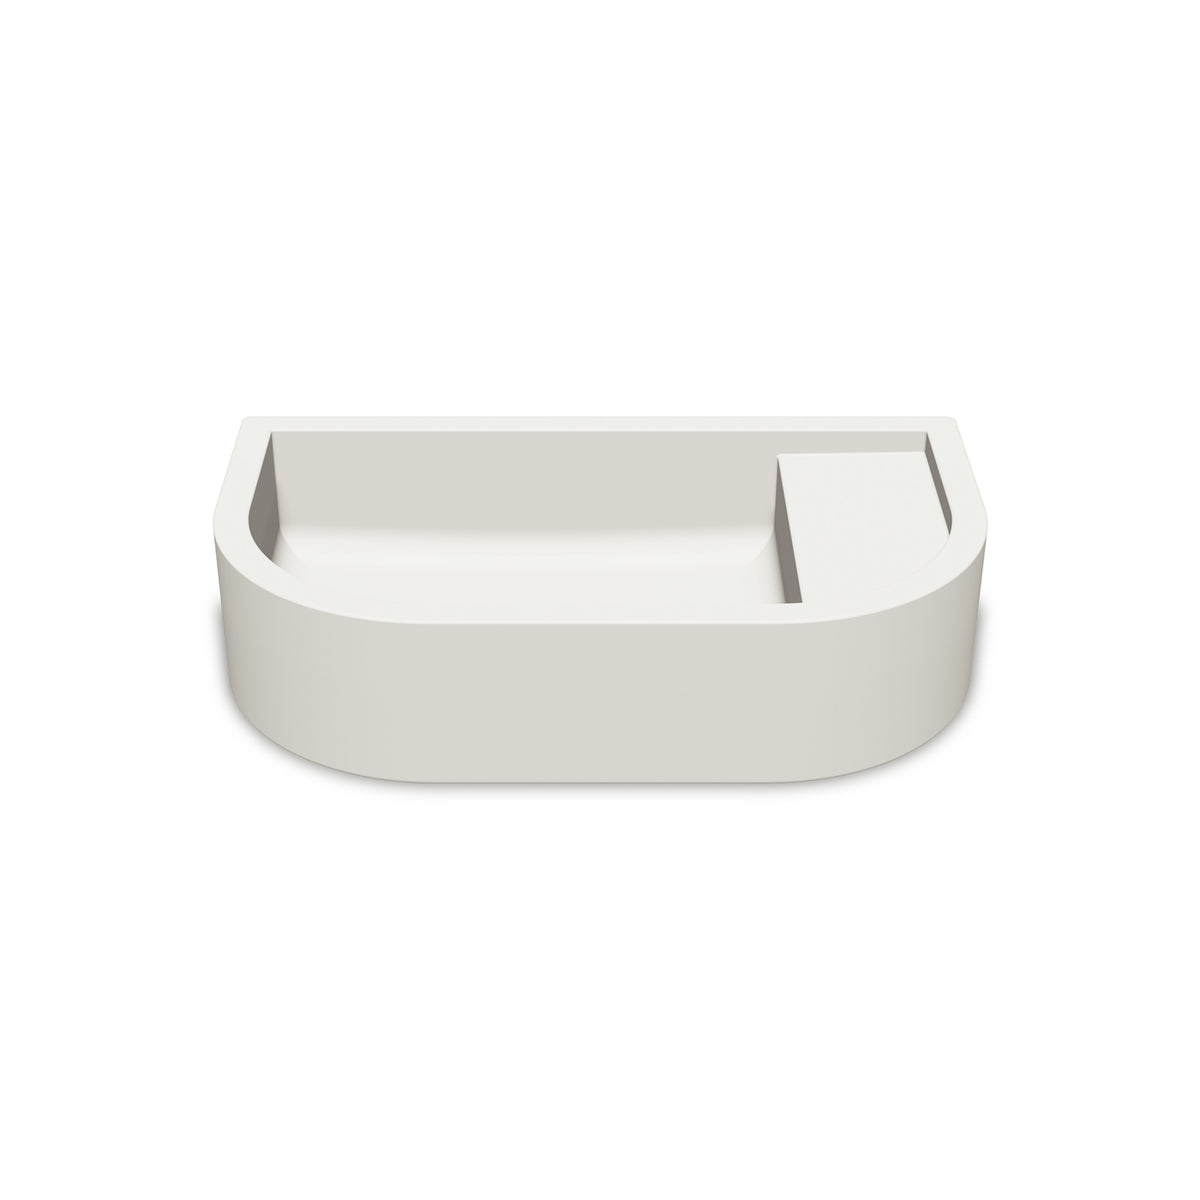 Loop 02 Basin - Overflow - Wall Hung (Ivory,No Tap Hole,Brass)